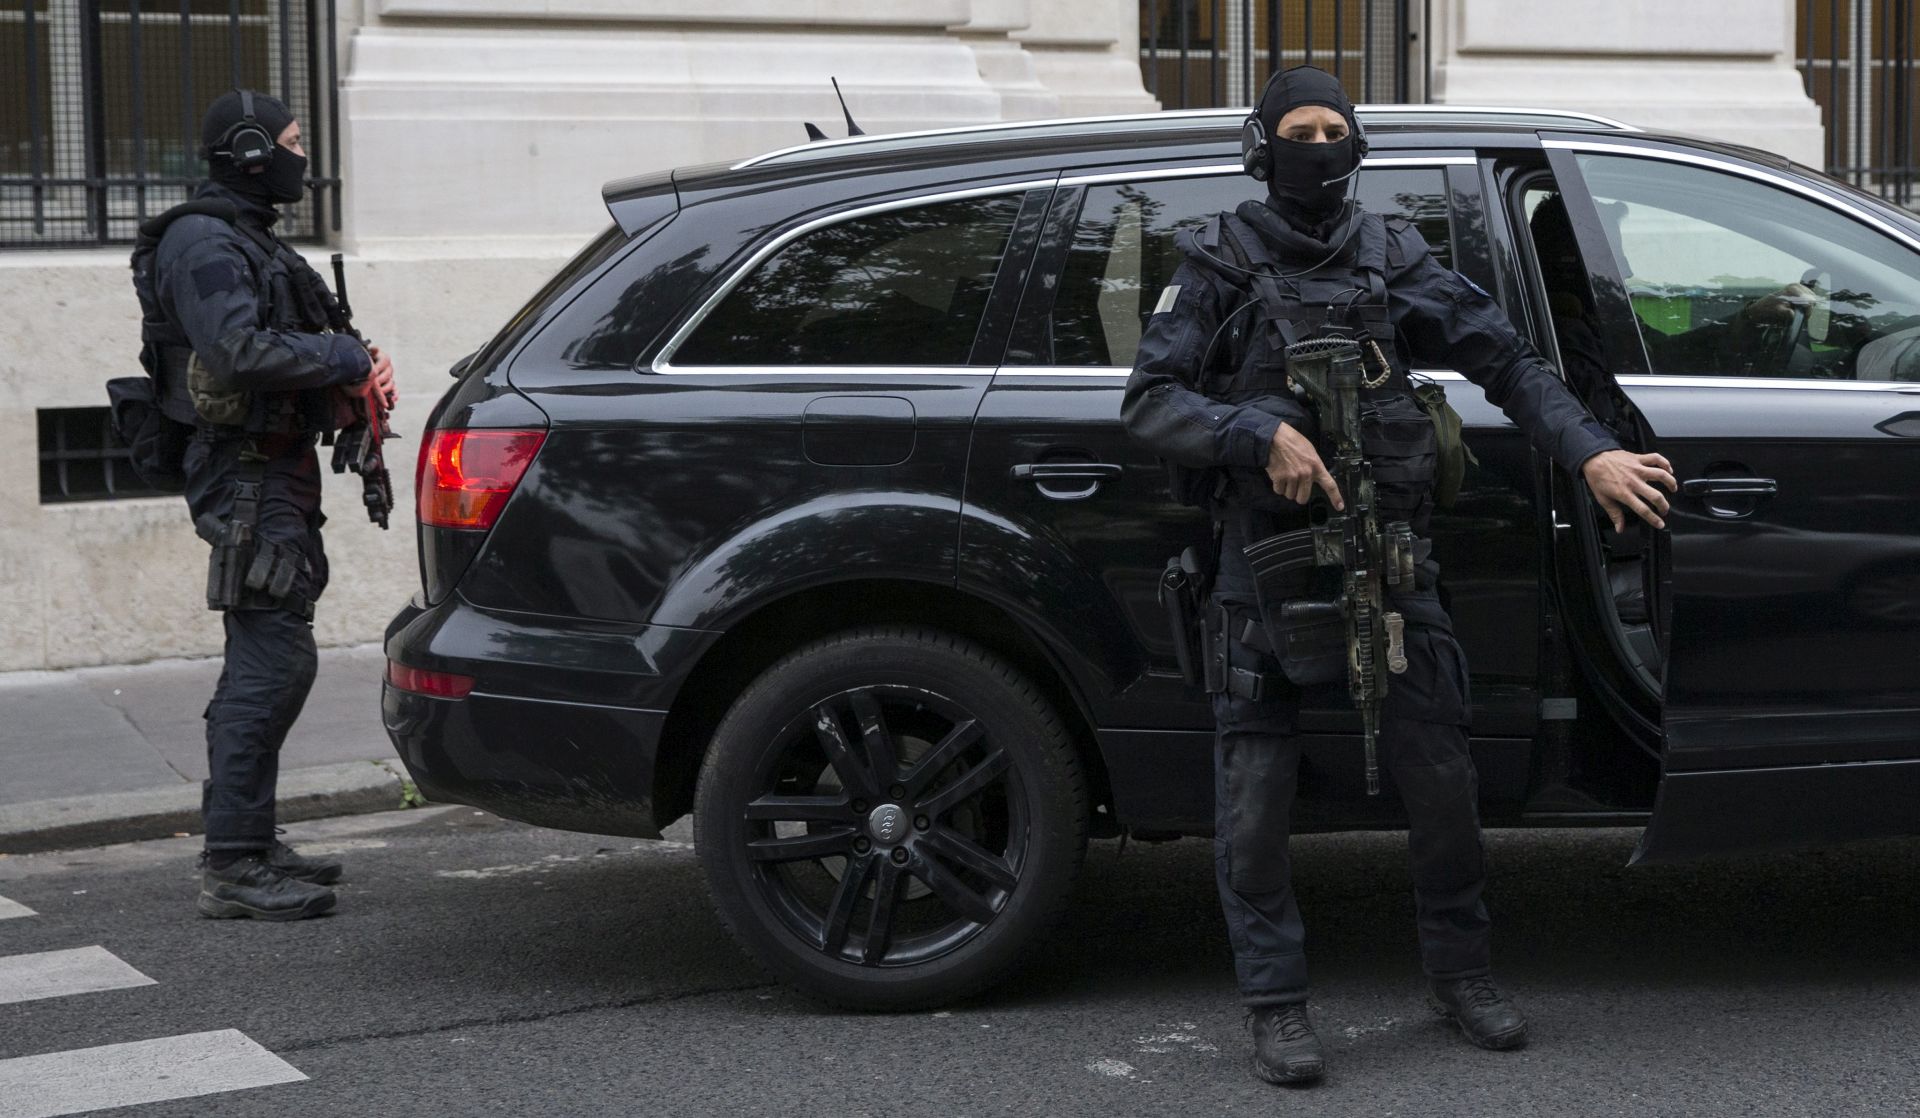 epa05318378 A French military task force GIGN secures the convoy transporting Paris attacks suspect Salah Abdeslam (unseen) arrives at the Palais de Justice at the 36, Quai des Orfevres where he is to appear before the French prosecutors in charge of the affair, in Paris, France, 20 May 2016. Salah Abdeslam was handed over by Belgium to French authorities to face prosecution in relation to the Paris terror attacks on 13 November 2015.  EPA/ETIENNE LAURENT